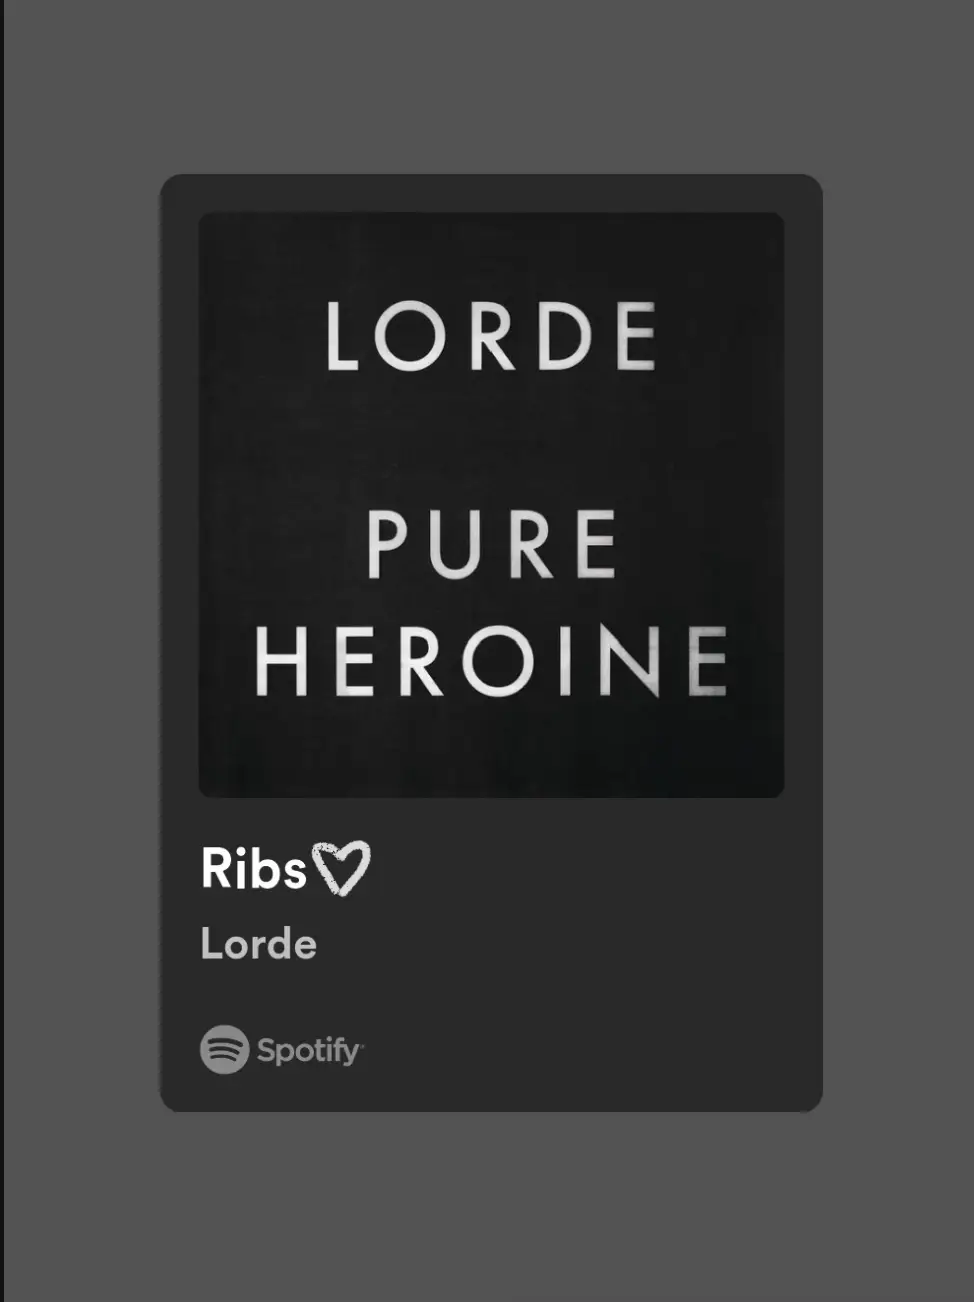  A Spotify ad for Lorde's song Pure Heroine.